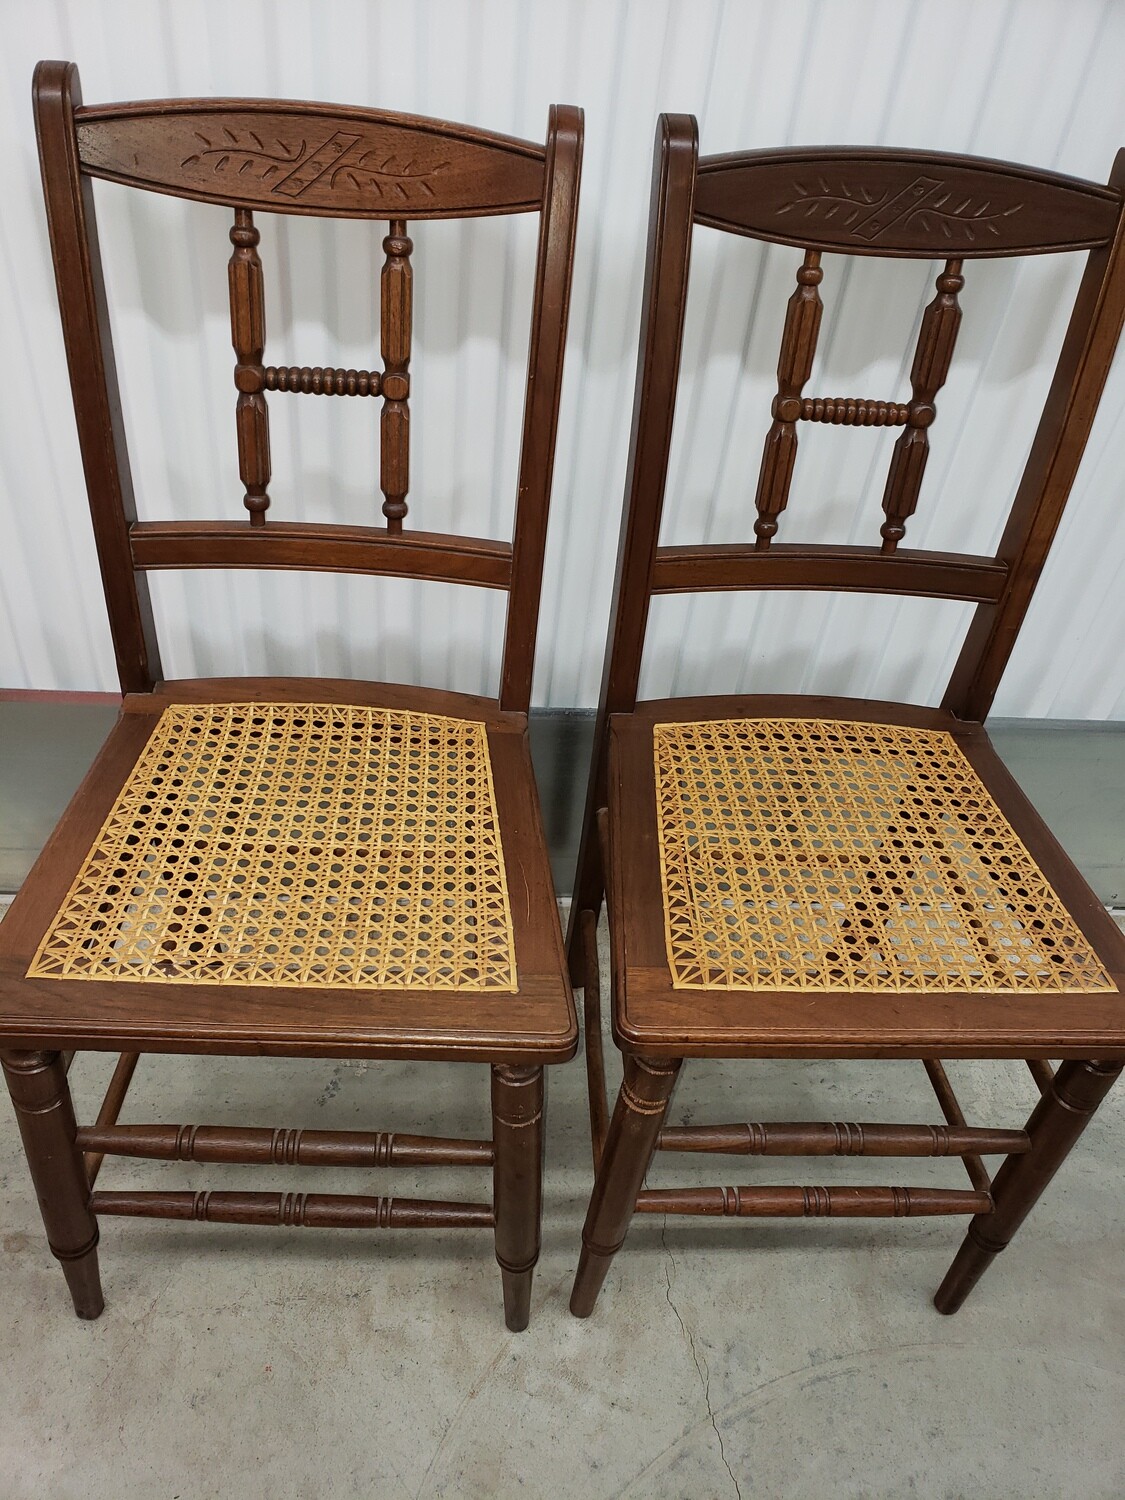 Pair Antique Chairs with caned seats #2213